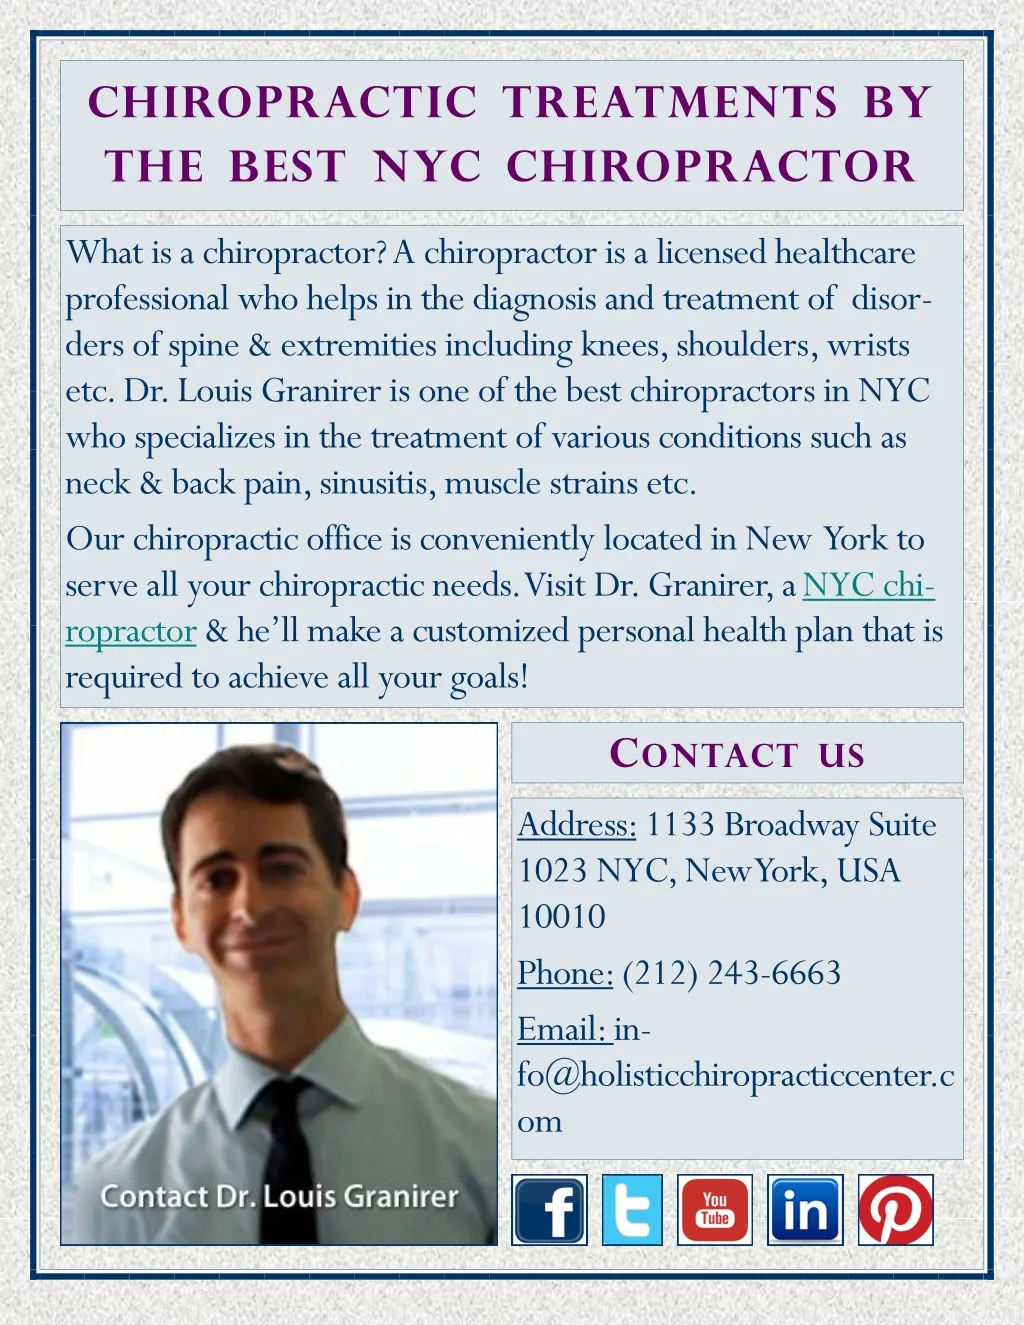 chiropractic treatments by the best